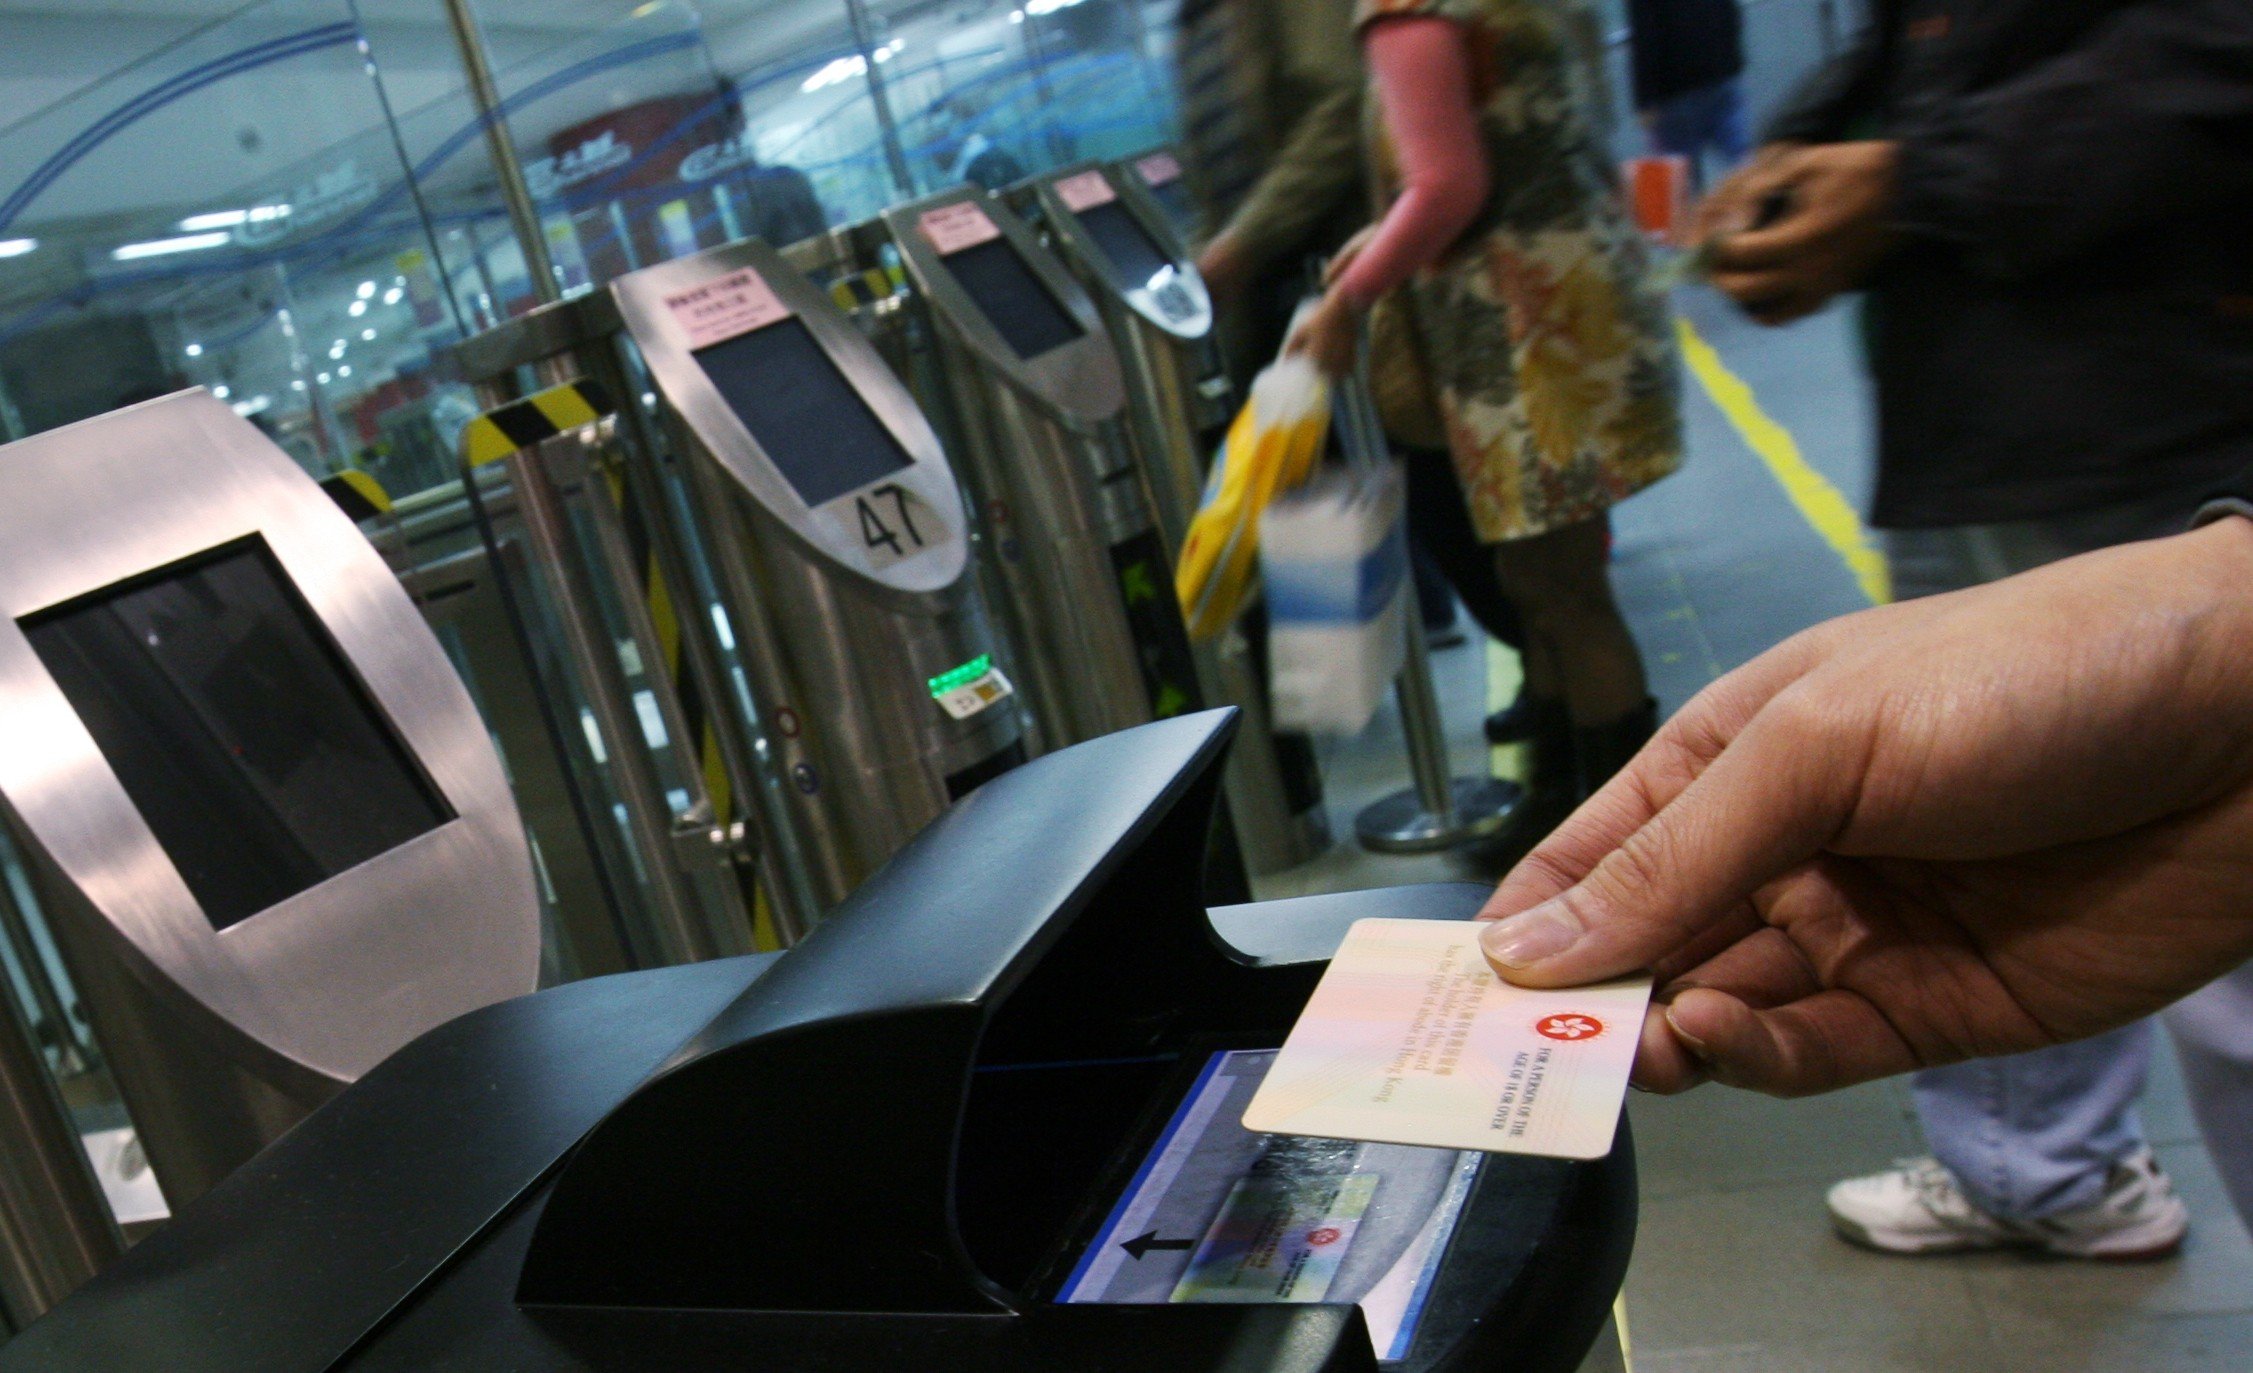 The new service will not replace the existing physical ID card currently issued to all Hong Kong residents, a source said. Photo: Felix Wong